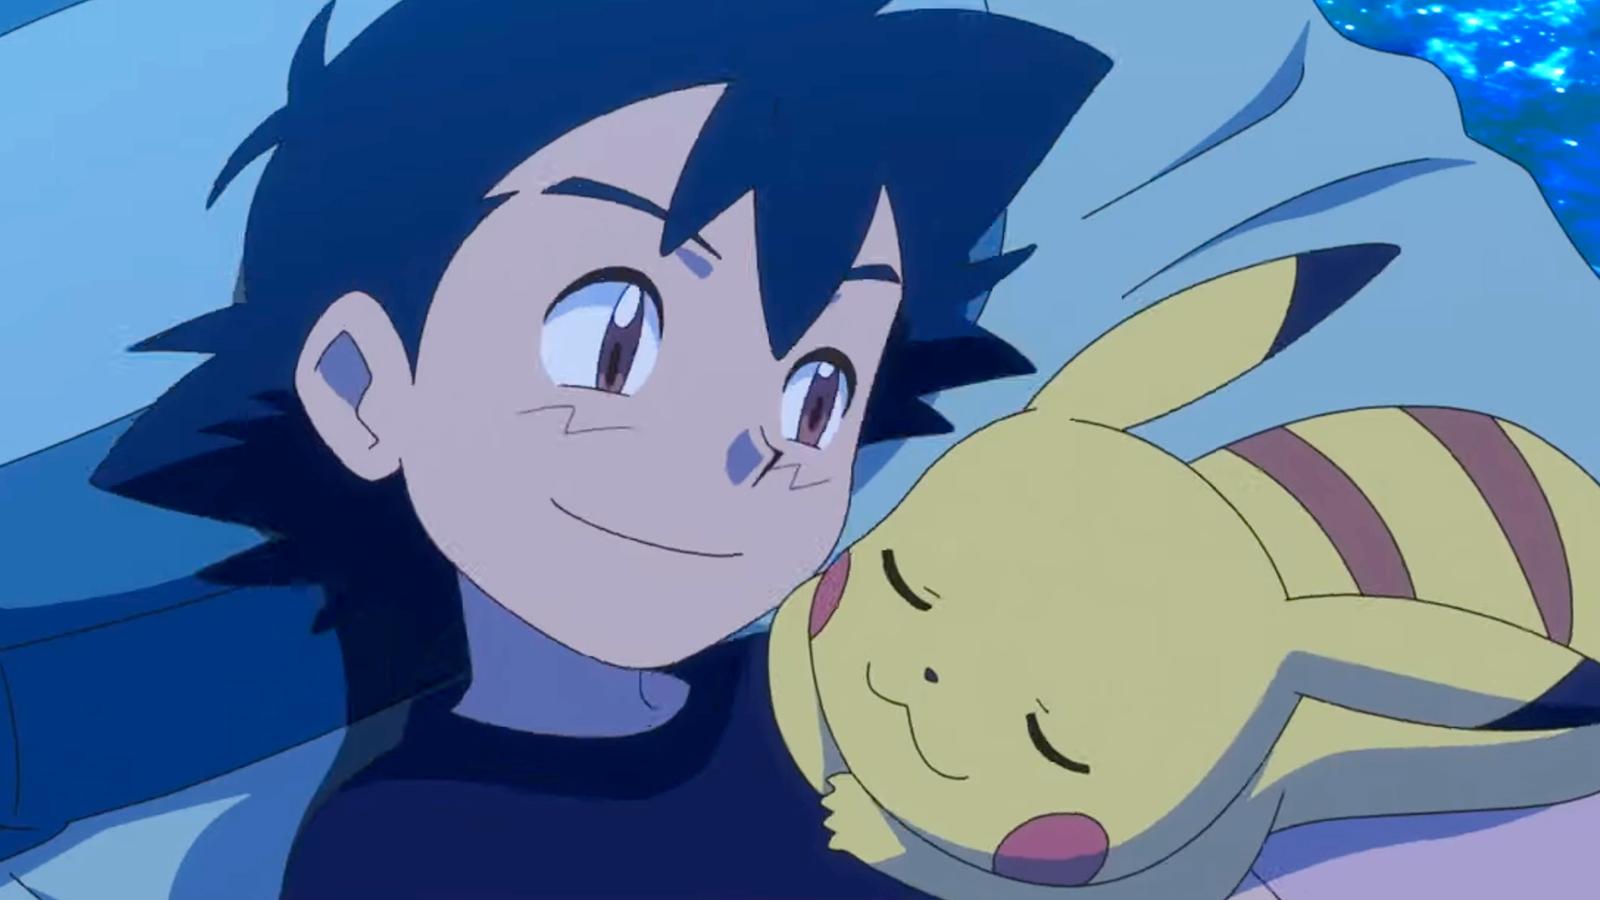 Ash and Pikachu in the Pokemon anime